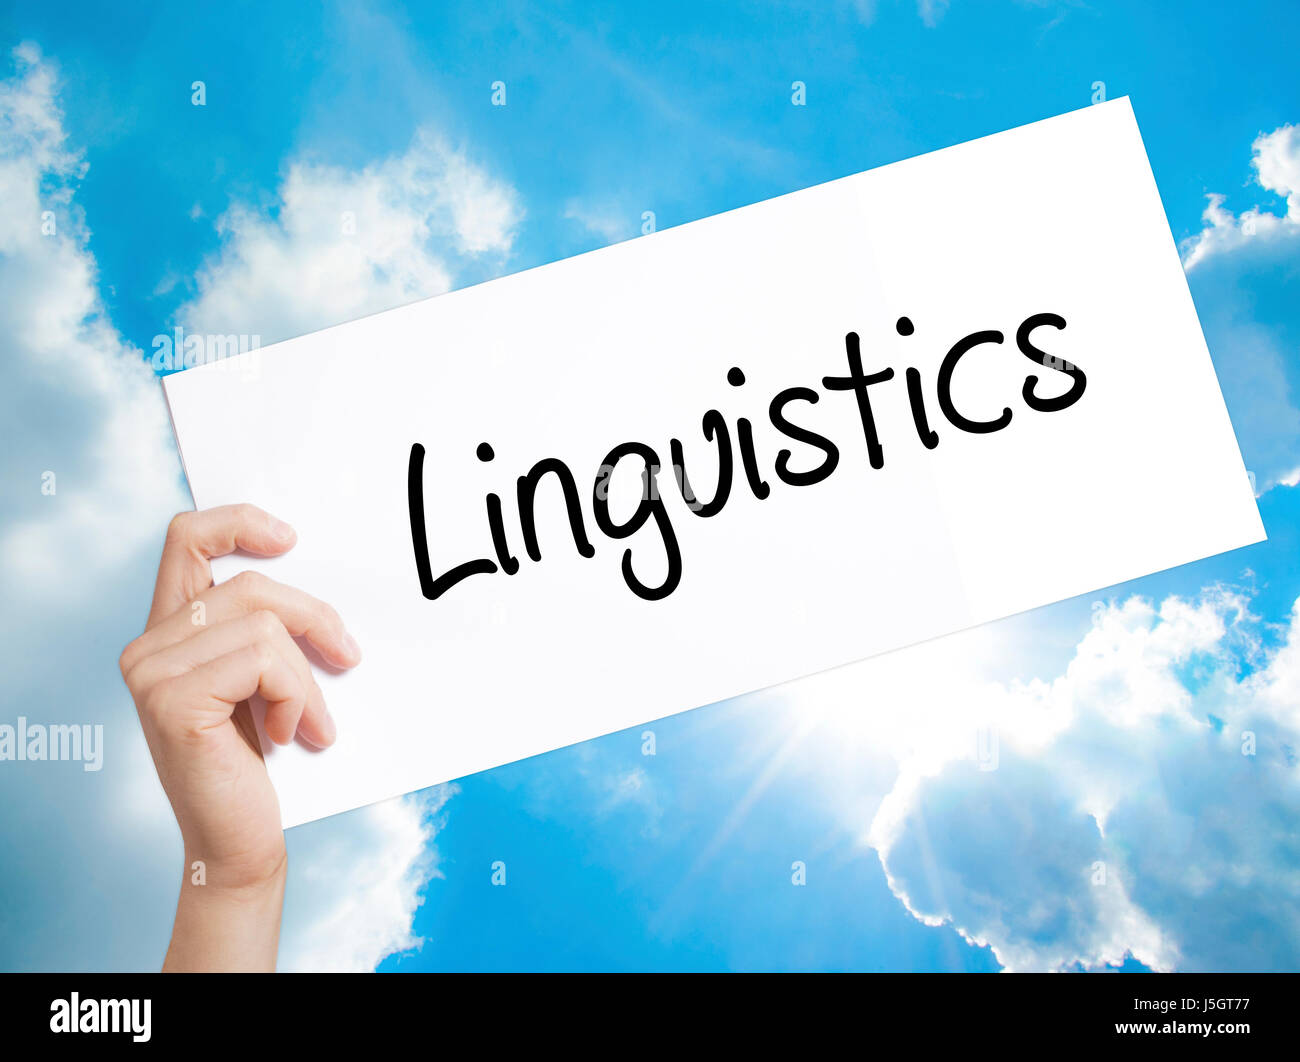 Linguistics  Sign on white paper. Man Hand Holding Paper with text. Isolated on sky background. Isolated on background. Business,   Business concept.  Stock Photo